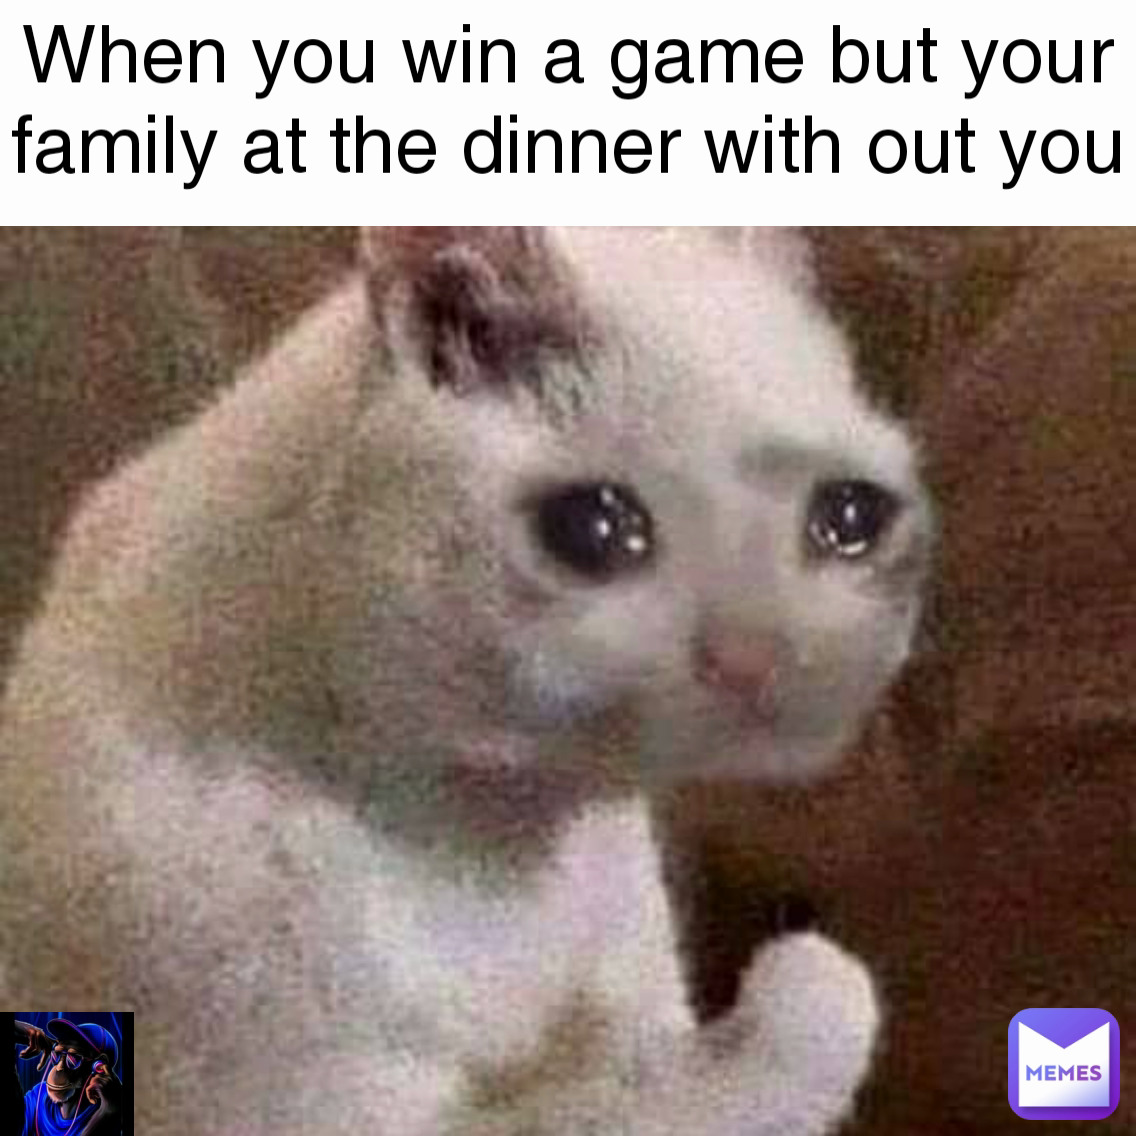 When you win a game but your family at the dinner with out you
